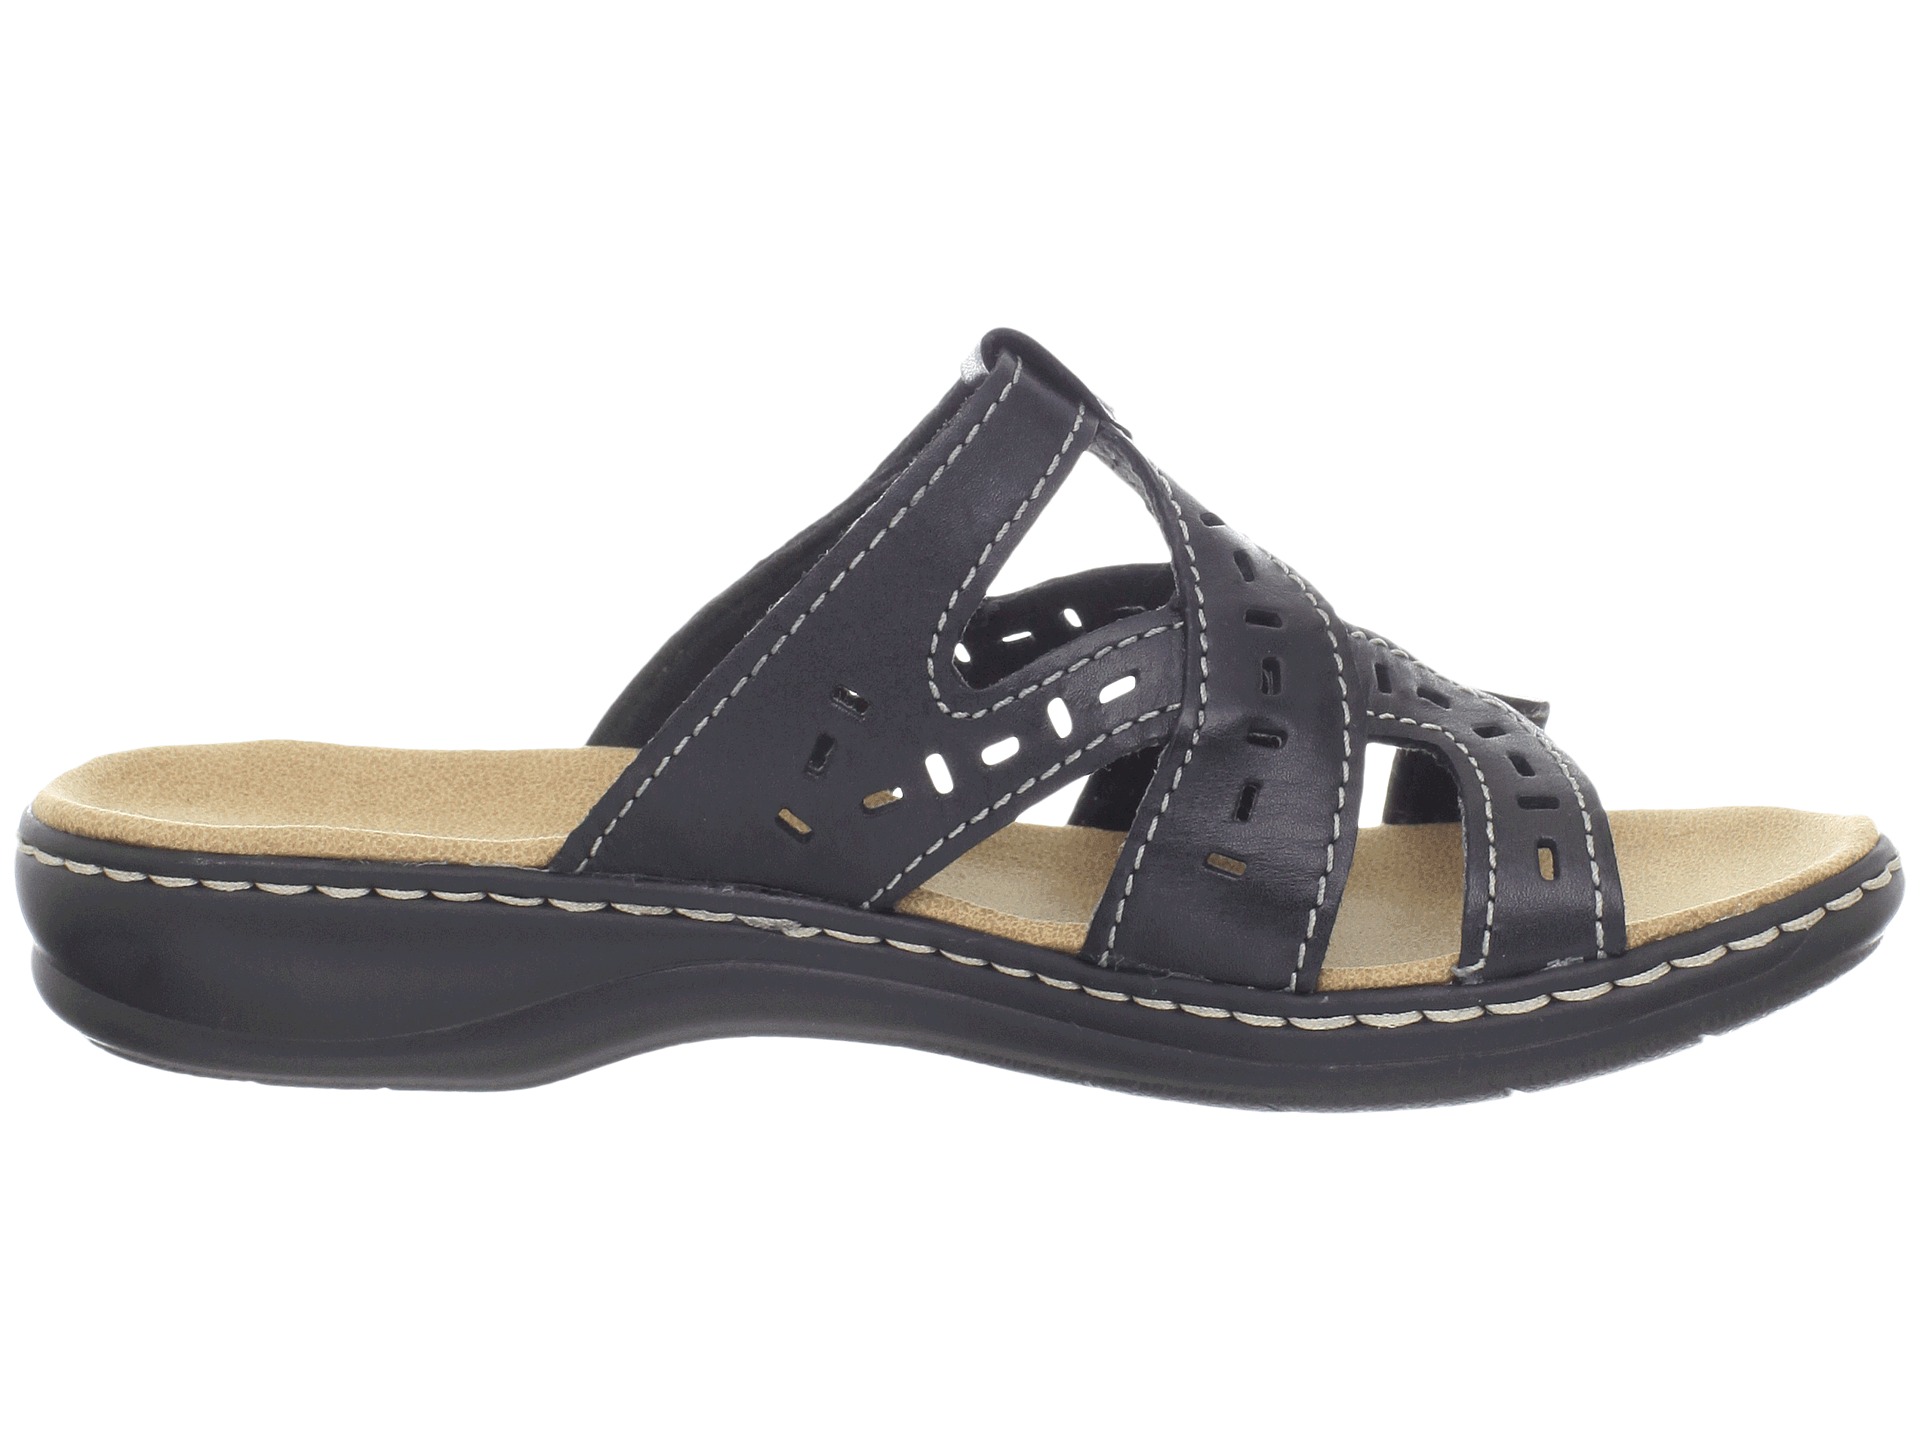 Clarks Leisa Truffle Black, Shoes, Women | Shipped Free at Zappos